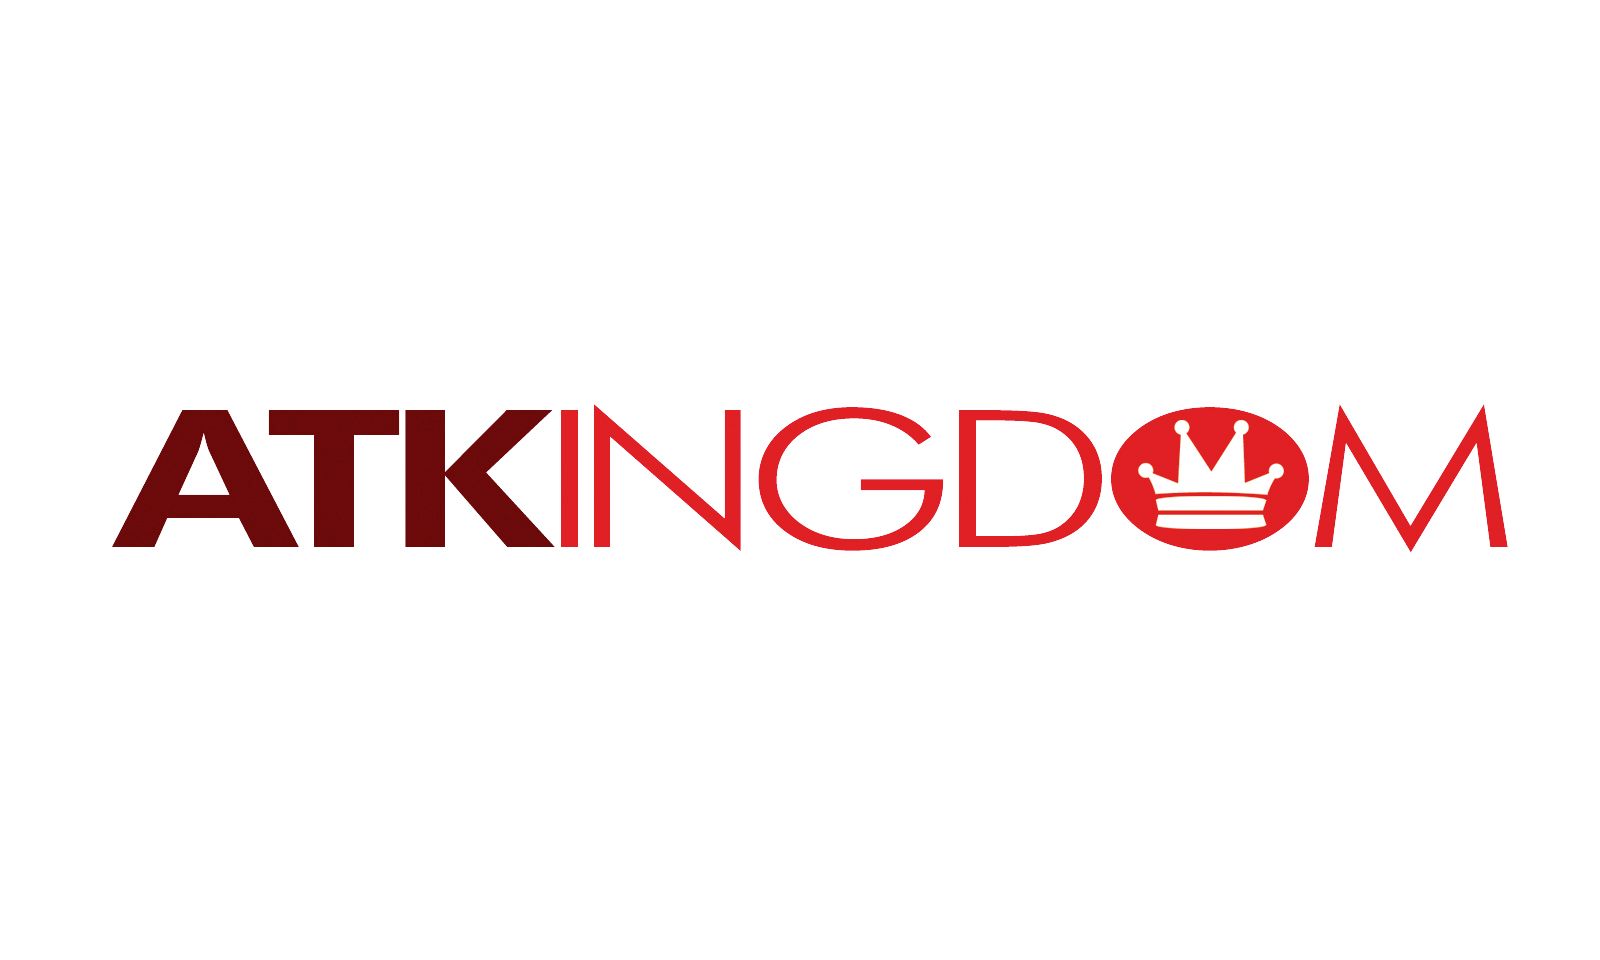 April Releases From ATKingdom Seeing Success